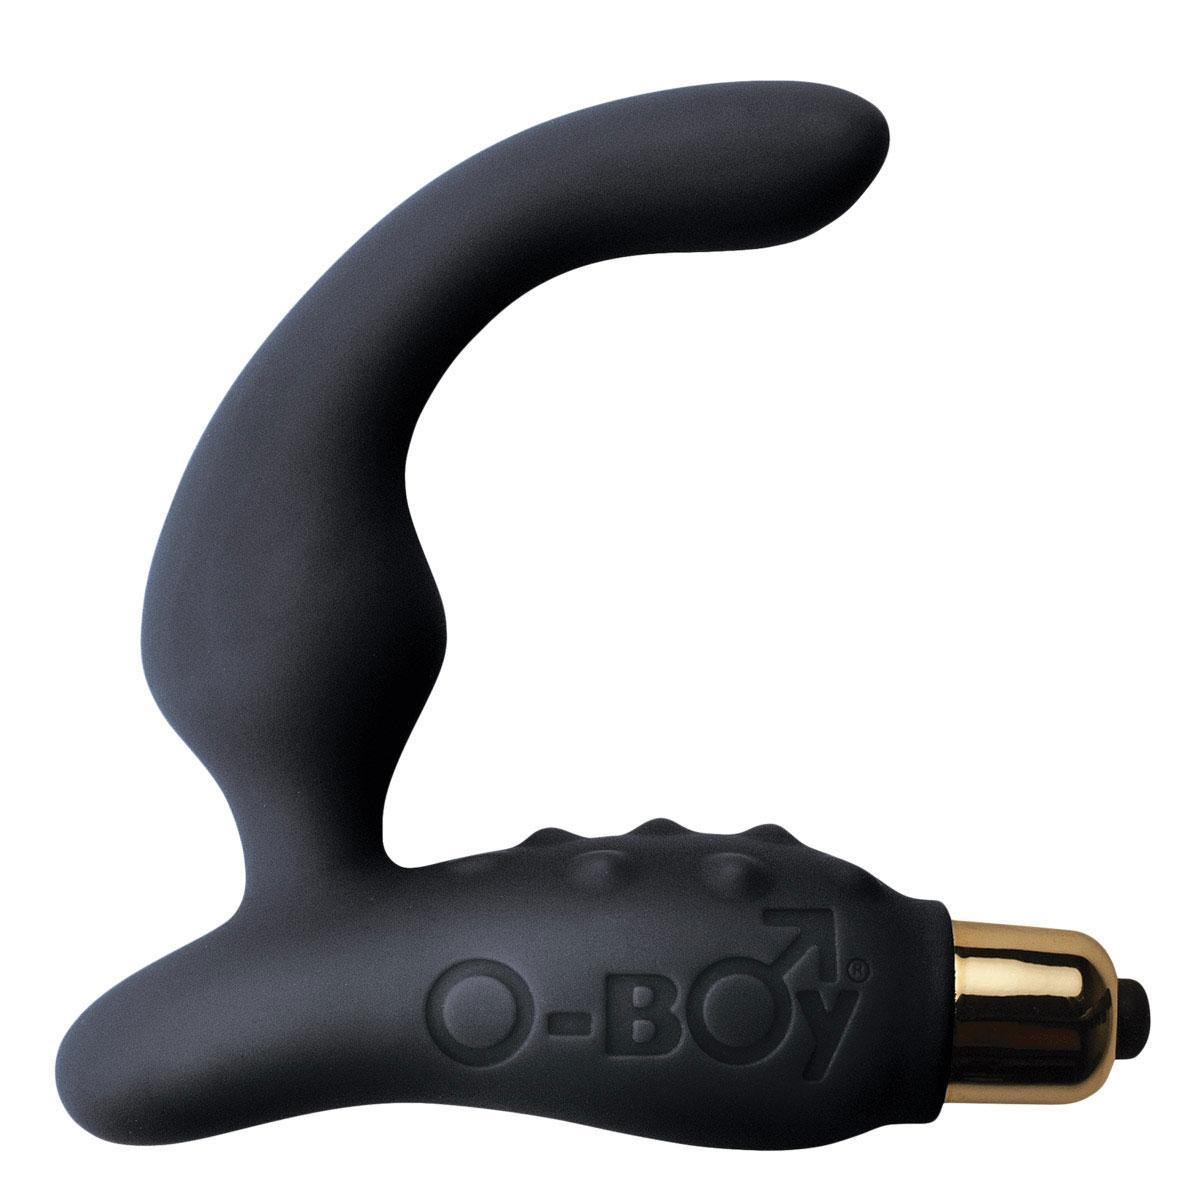 O-Boy Prostate Massager - Buy At Luxury Toy X - Free 3-Day Shipping